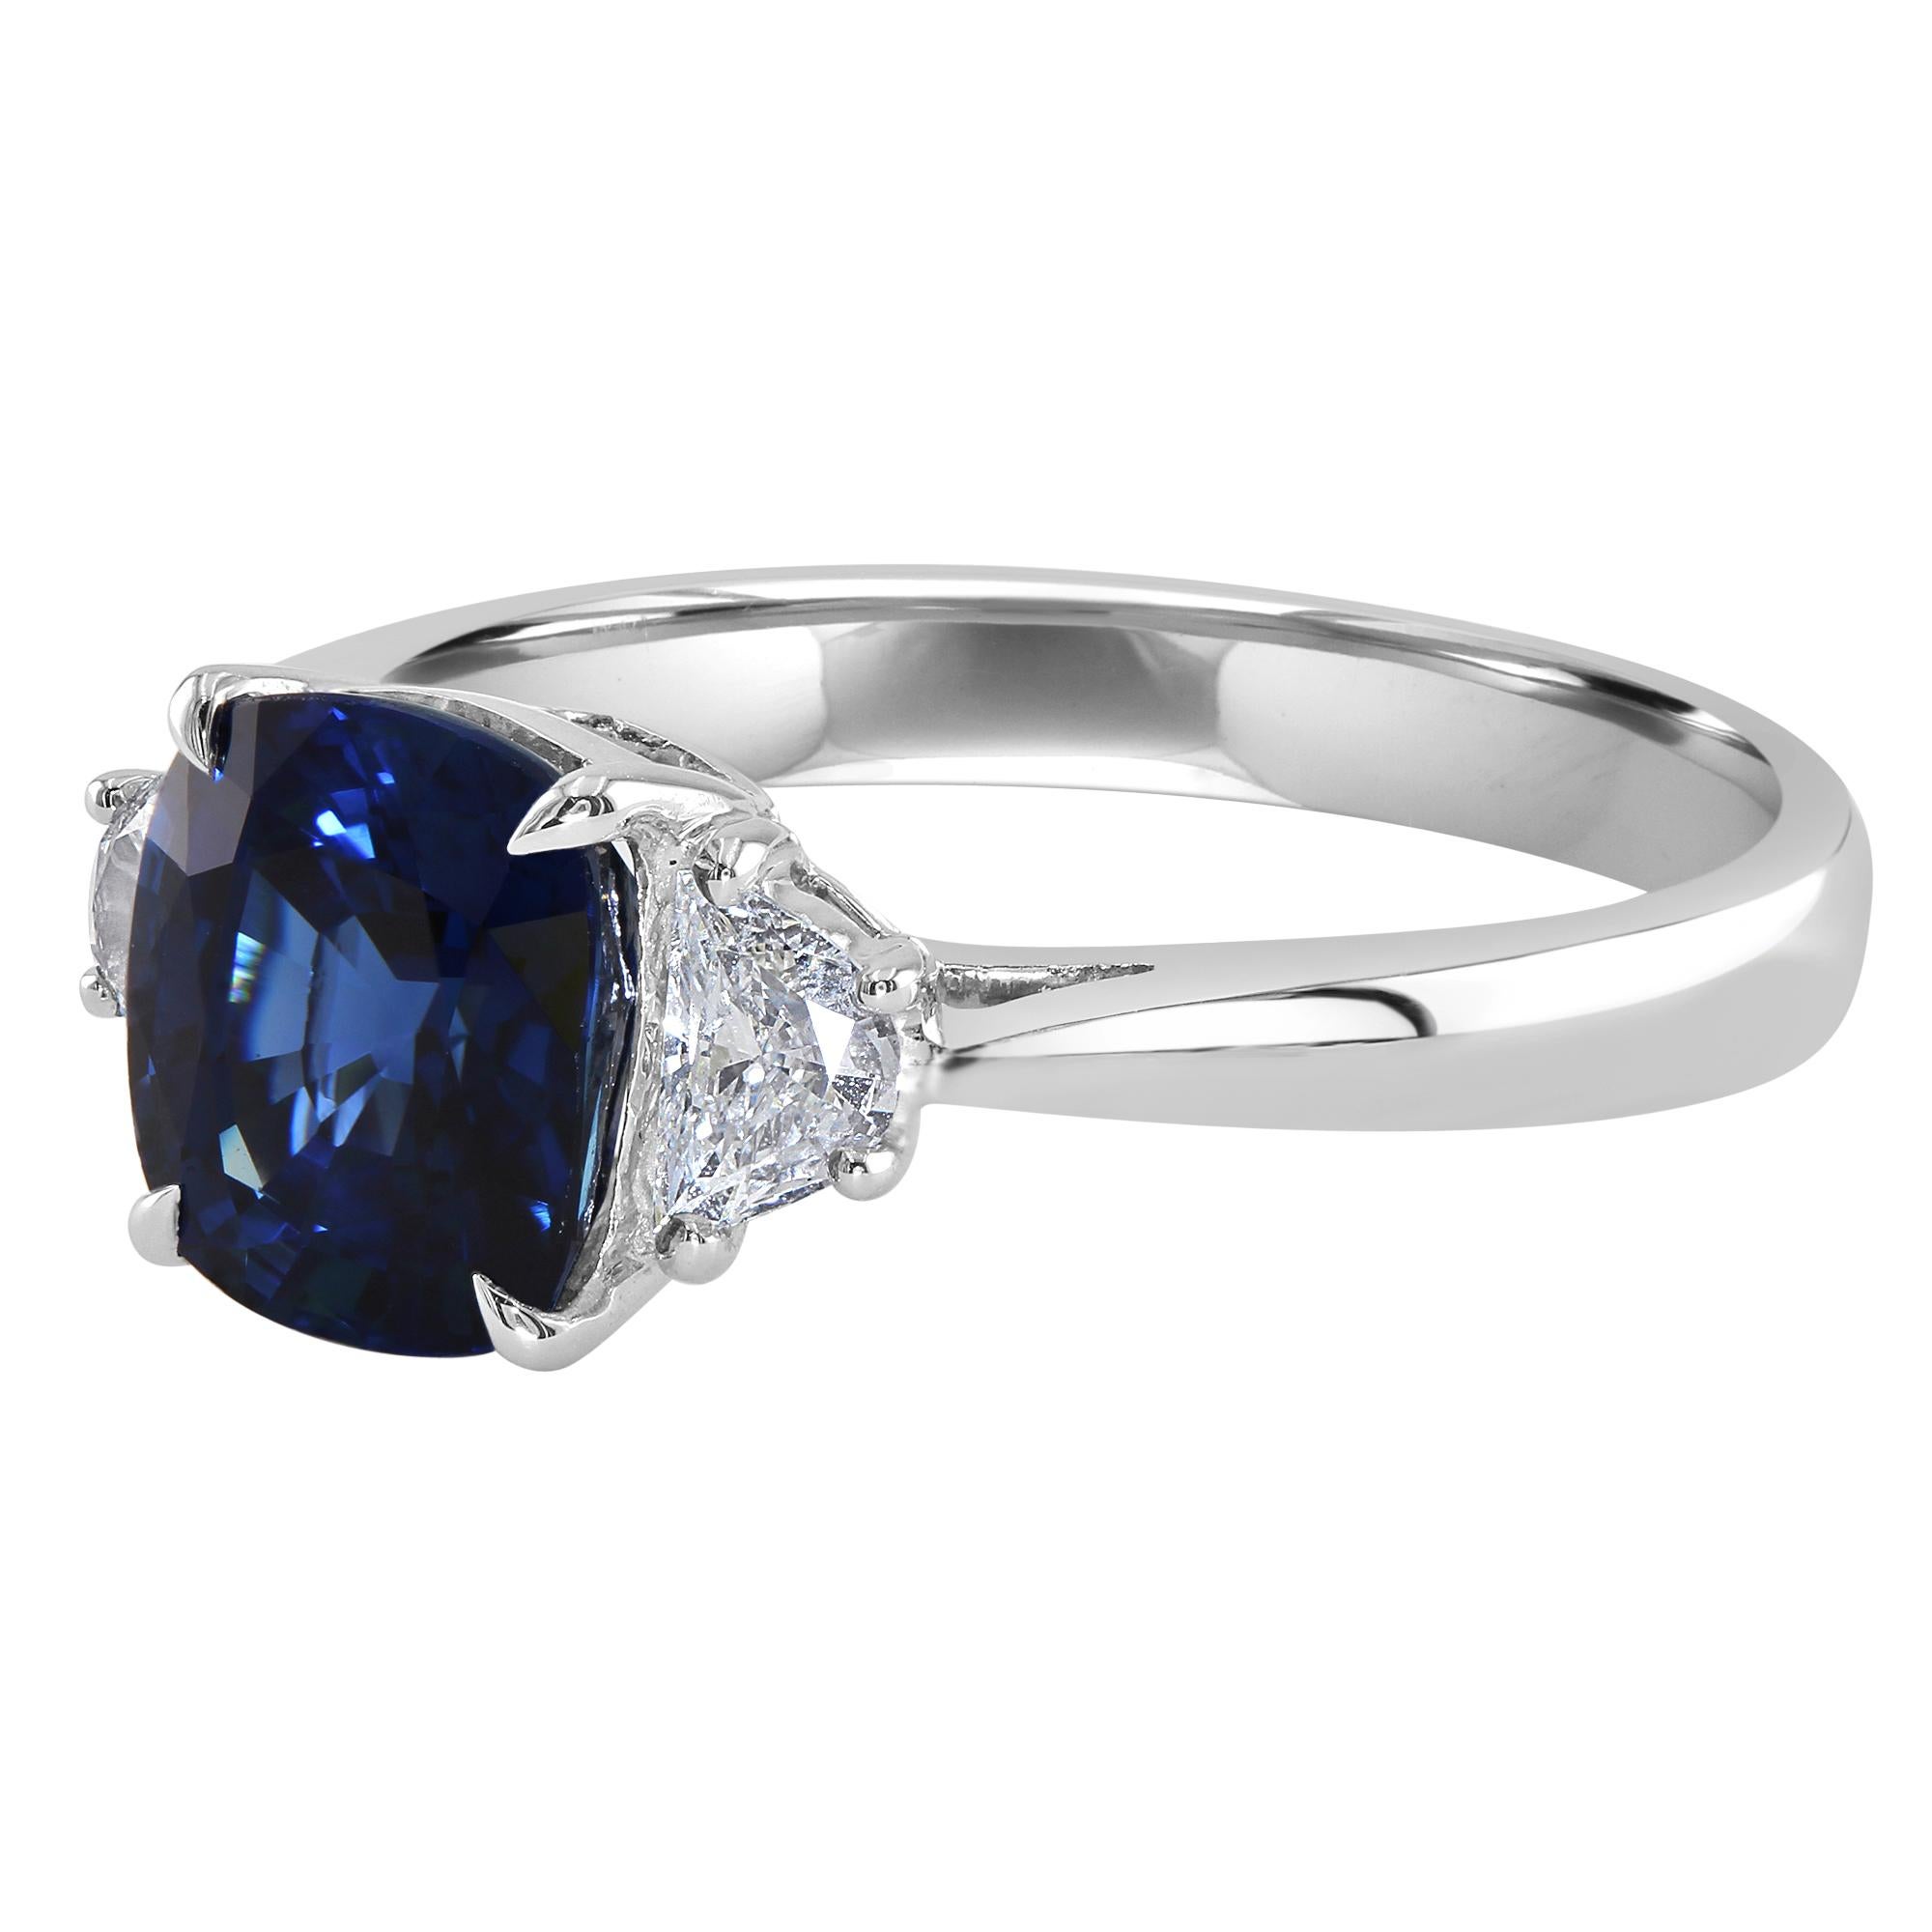 This ring features a beautiful 2.09 carat cushion blue sapphire, set between two half moons, 0.24 carat total weight.

Enjoy a stunning blue sapphire three-stone-ring that would make for an amazing and unique colored gemstone engagement ring. The